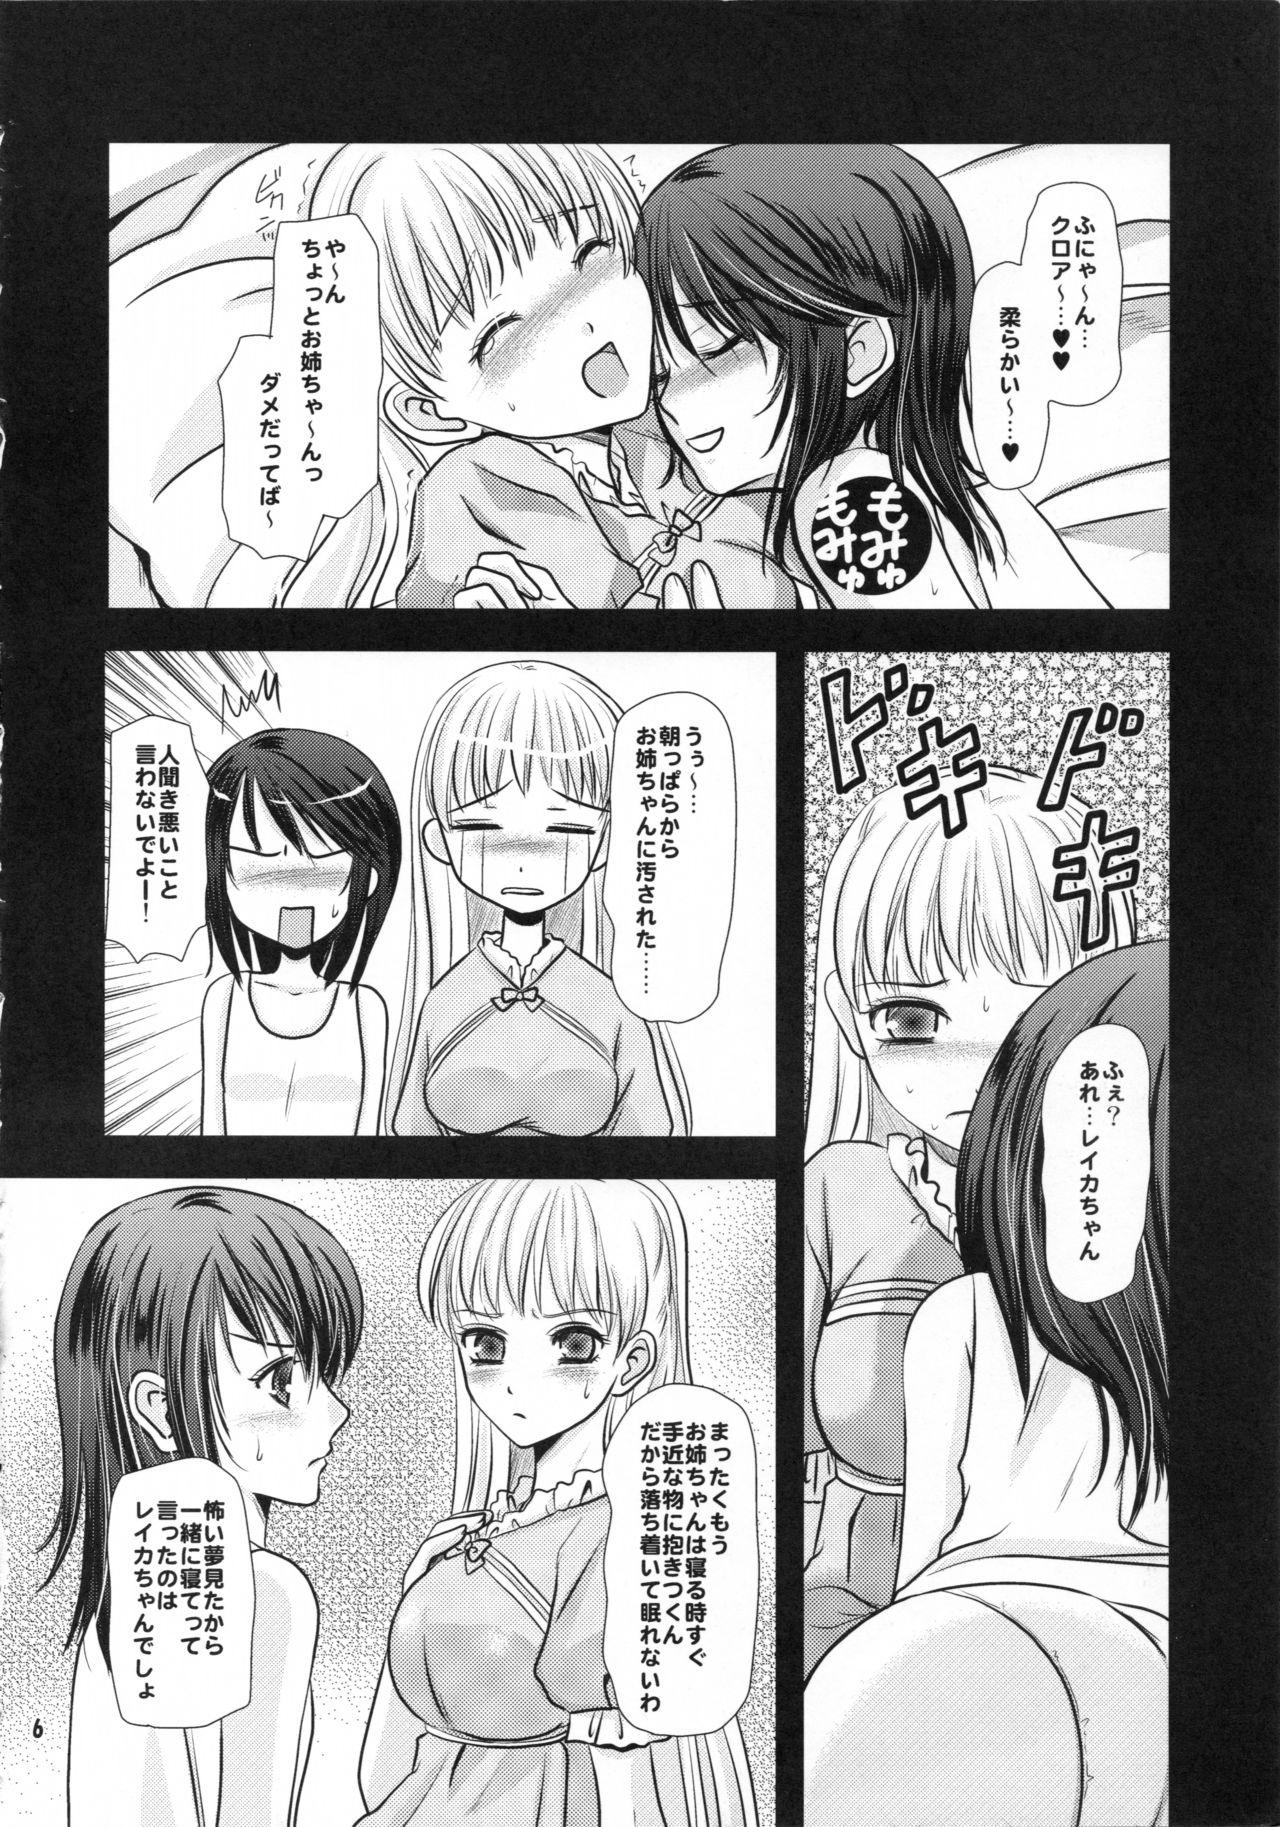 Wife heavenly dive - Ar tonelico Real Sex - Page 6